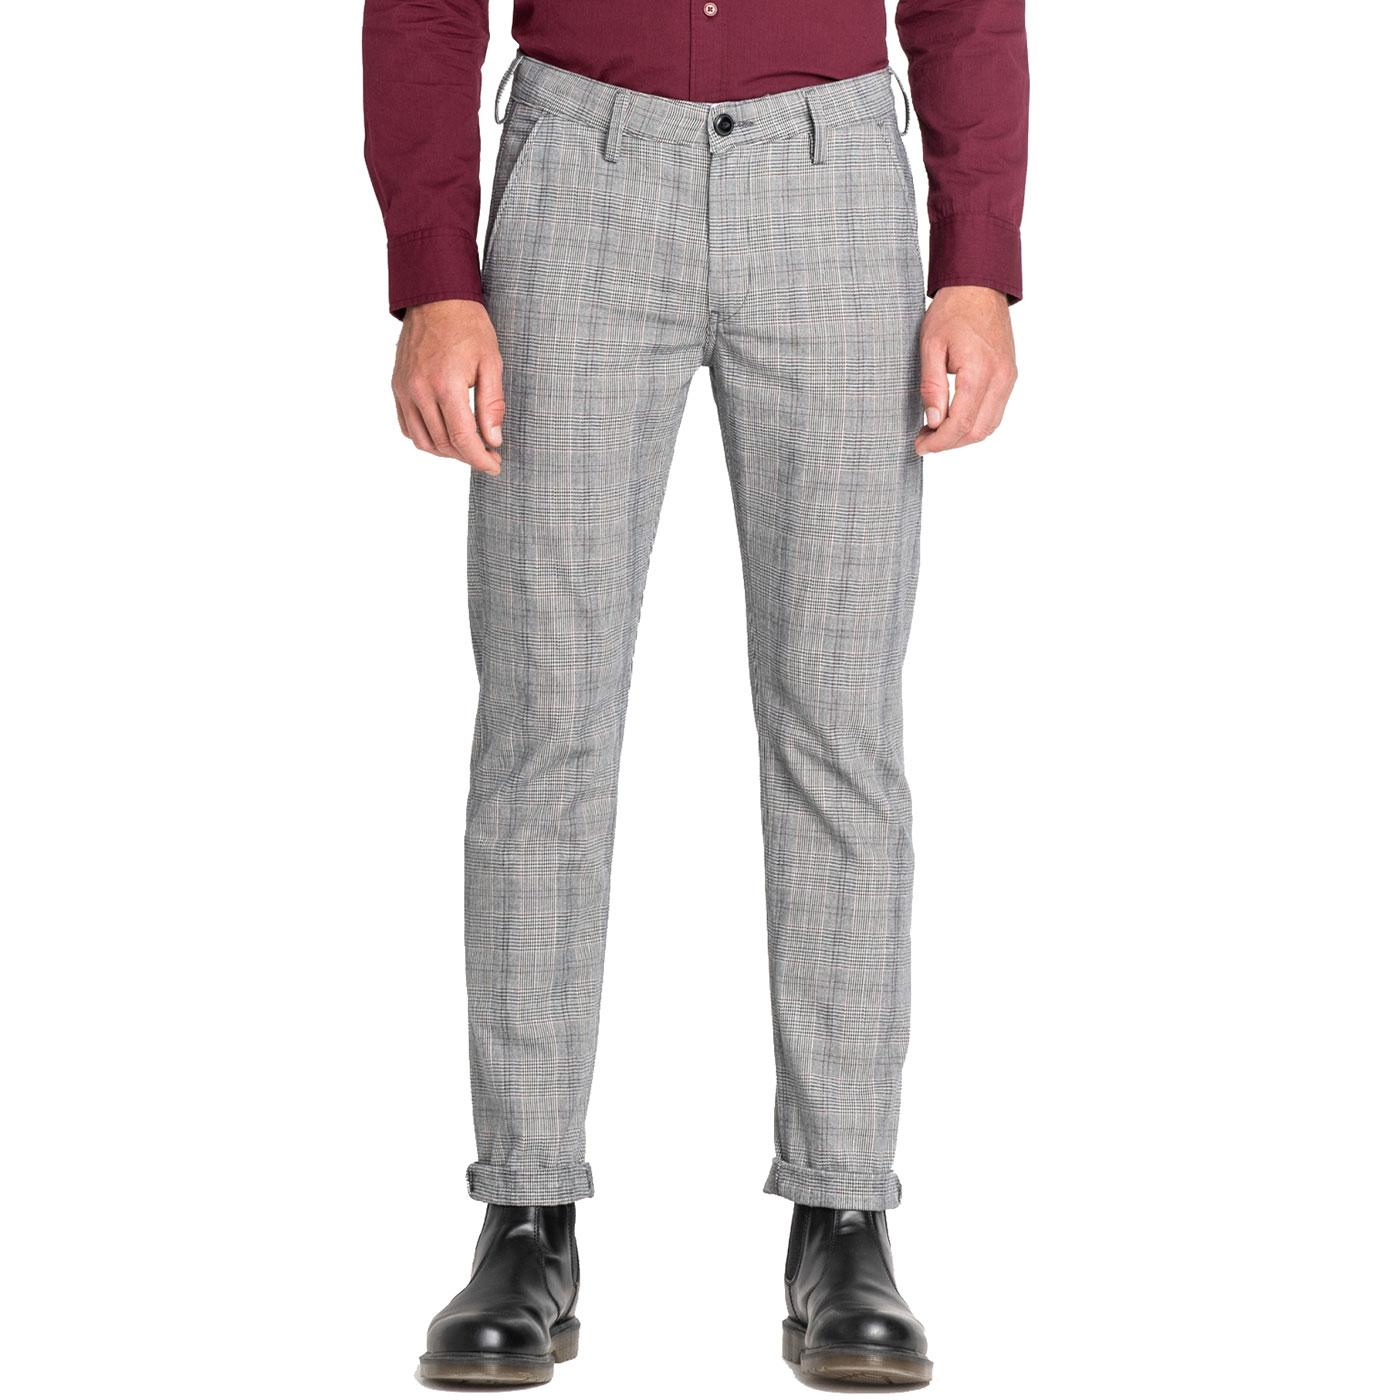 LEE JEANS Men's Prince Of Wales Check Chino Trousers